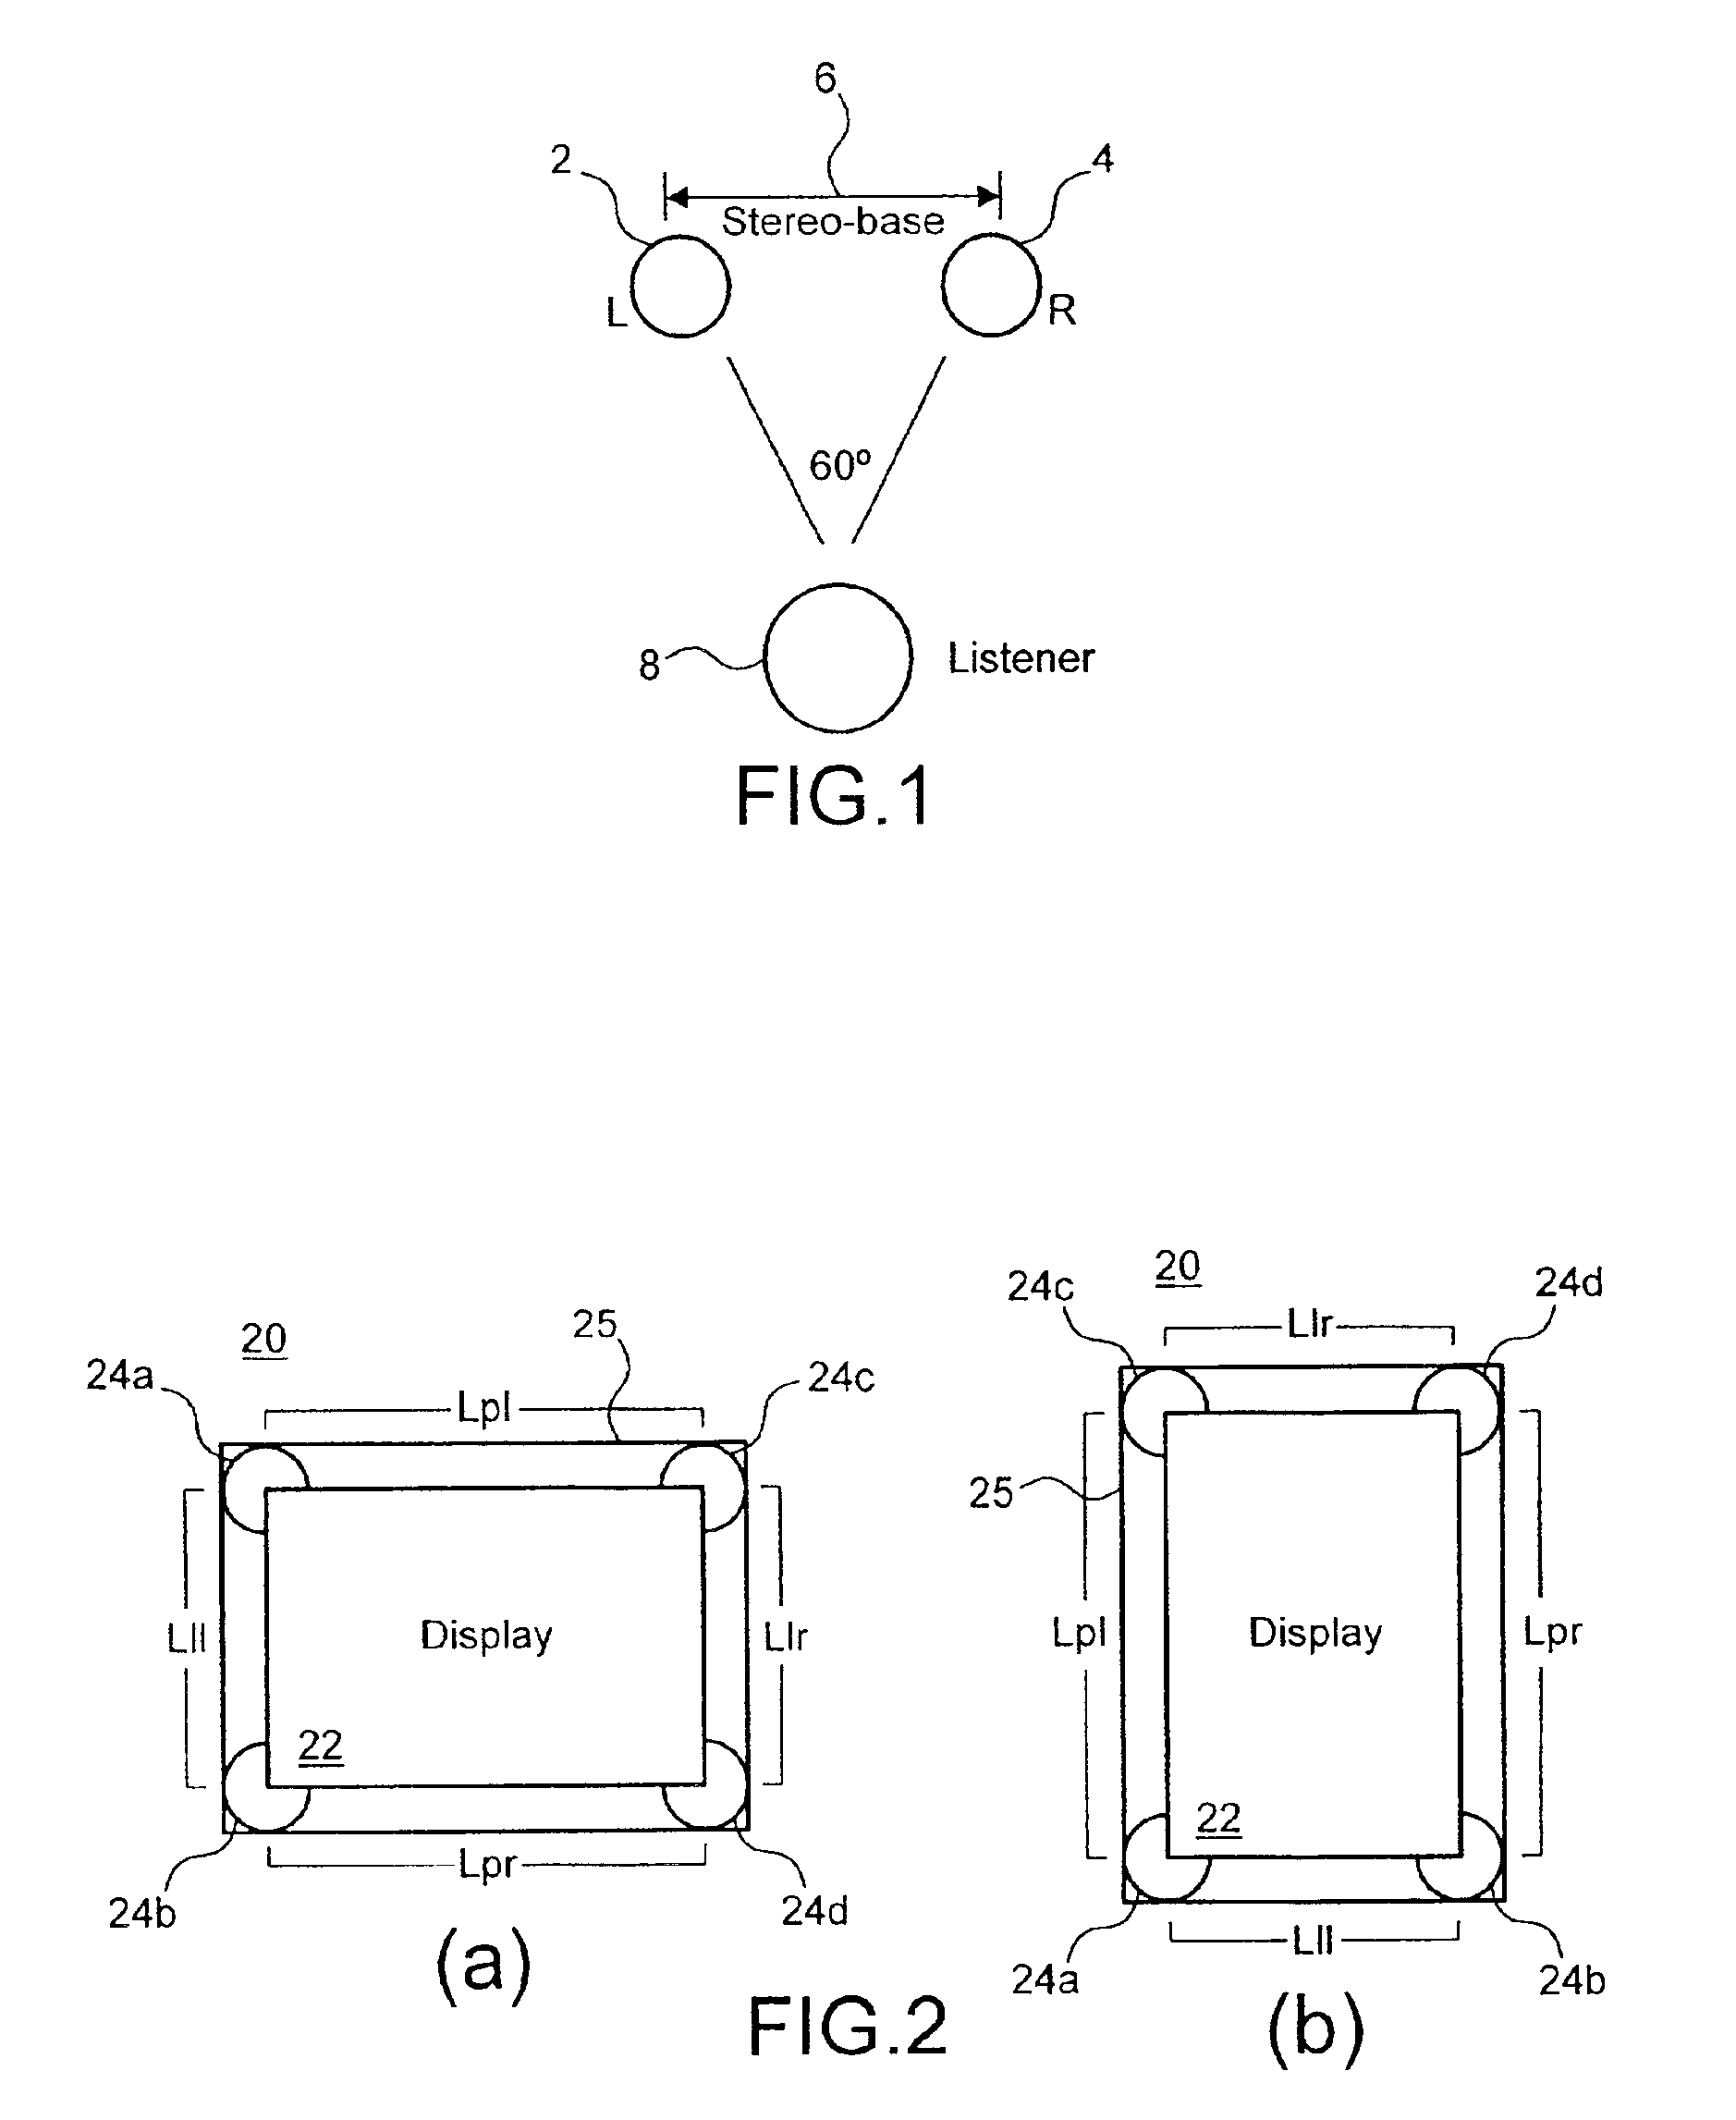 Stereophonic reproduction maintaining means and methods for operation in horizontal and vertical A/V appliance positions